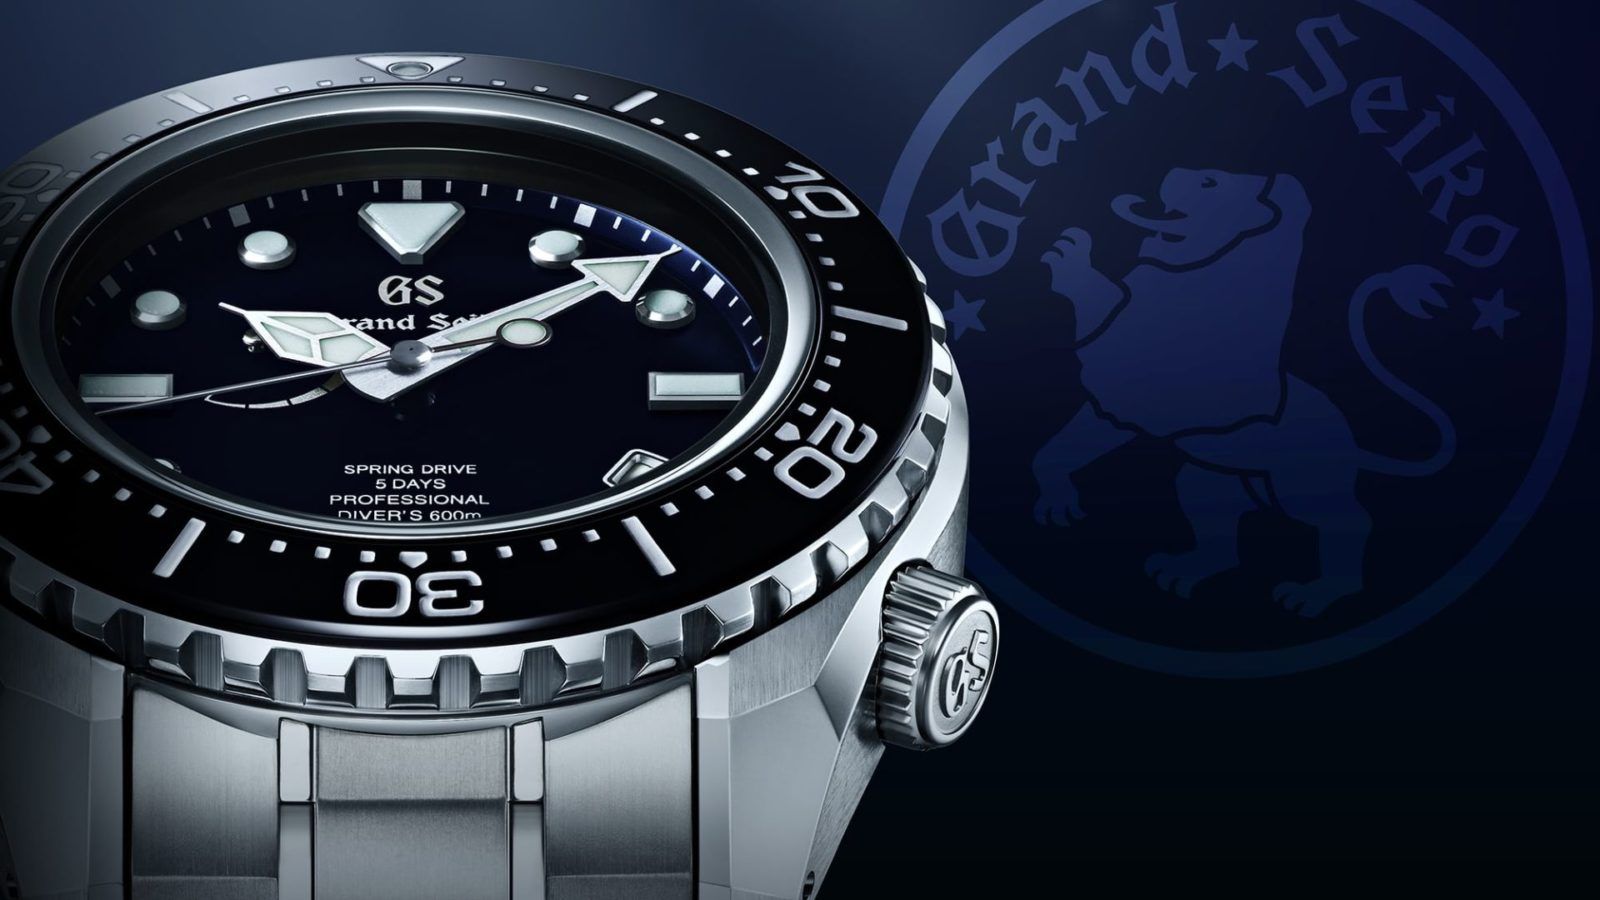 Grand Seiko debuts an all-new Spring Drive in the beastly SLGA001 diver